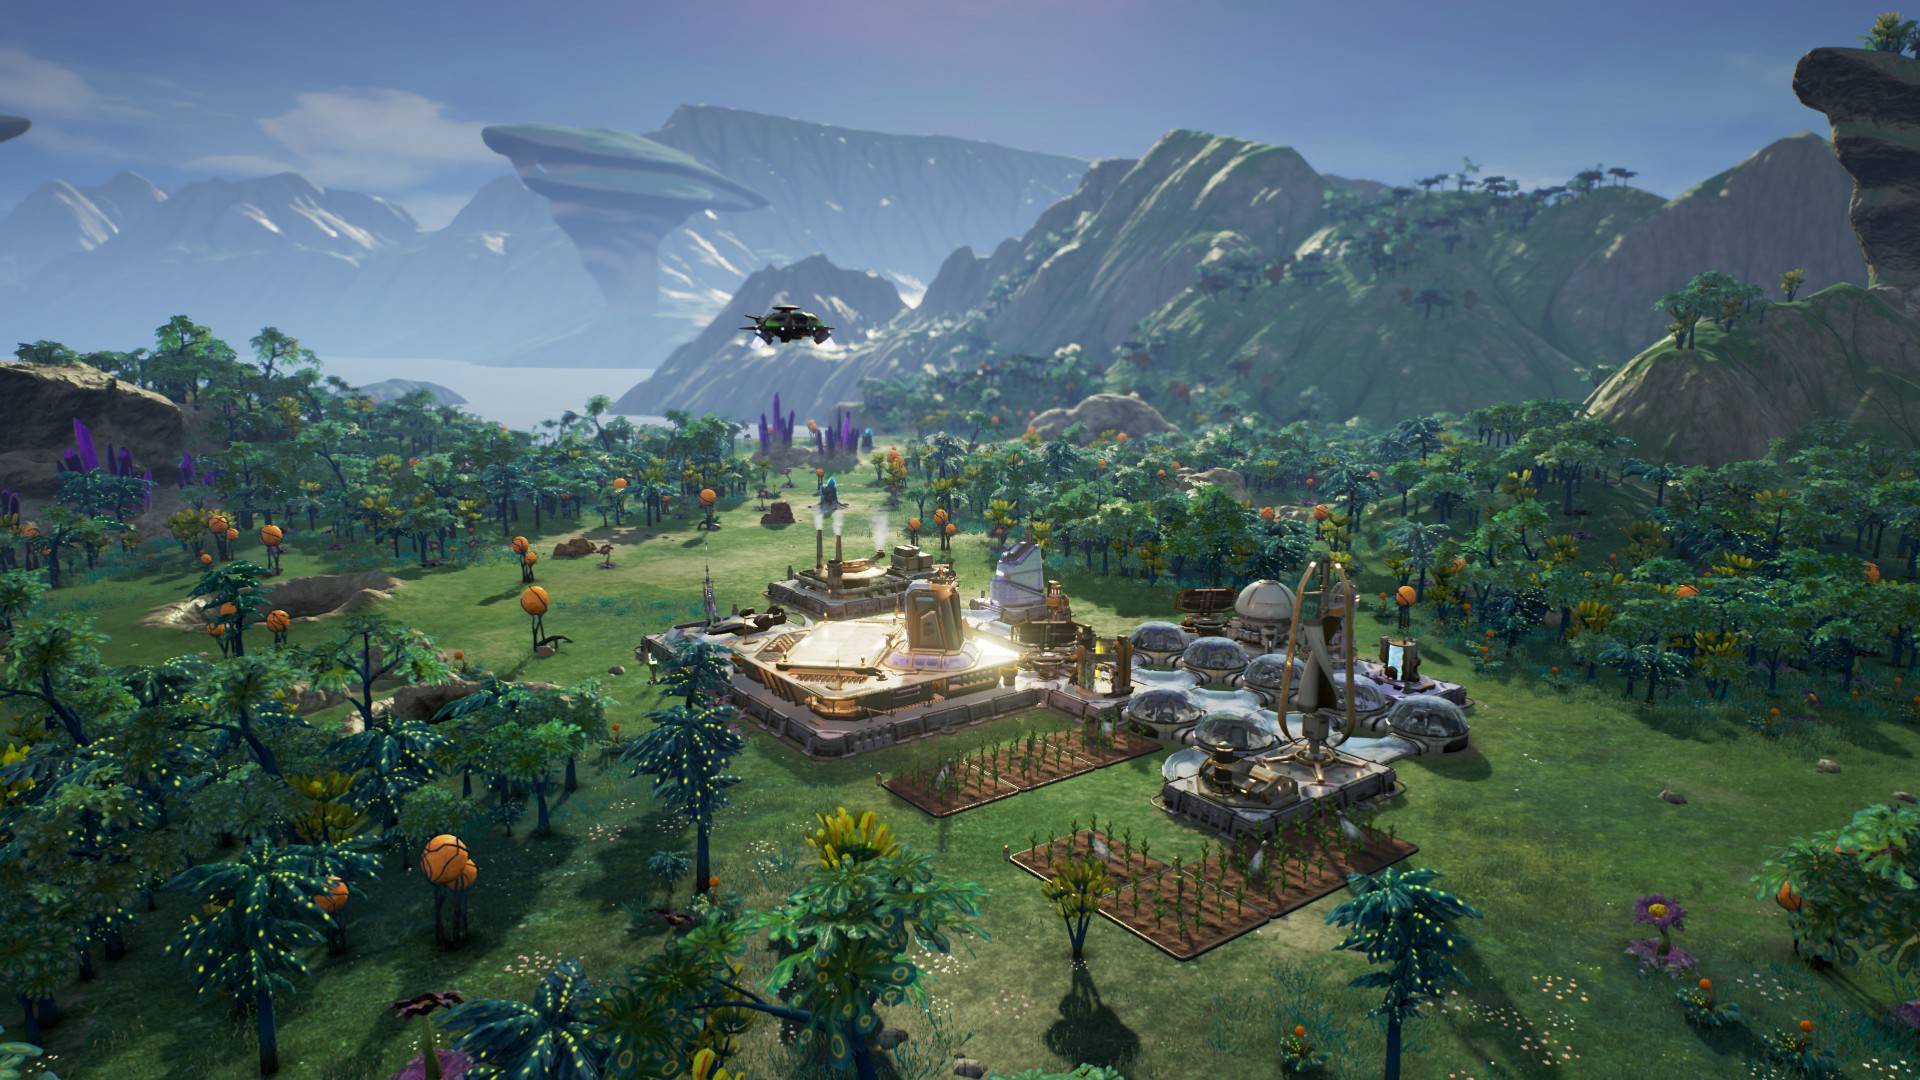 Best city-building games: Aven Colony. Image shows a futuristic settlement on an alien planet.